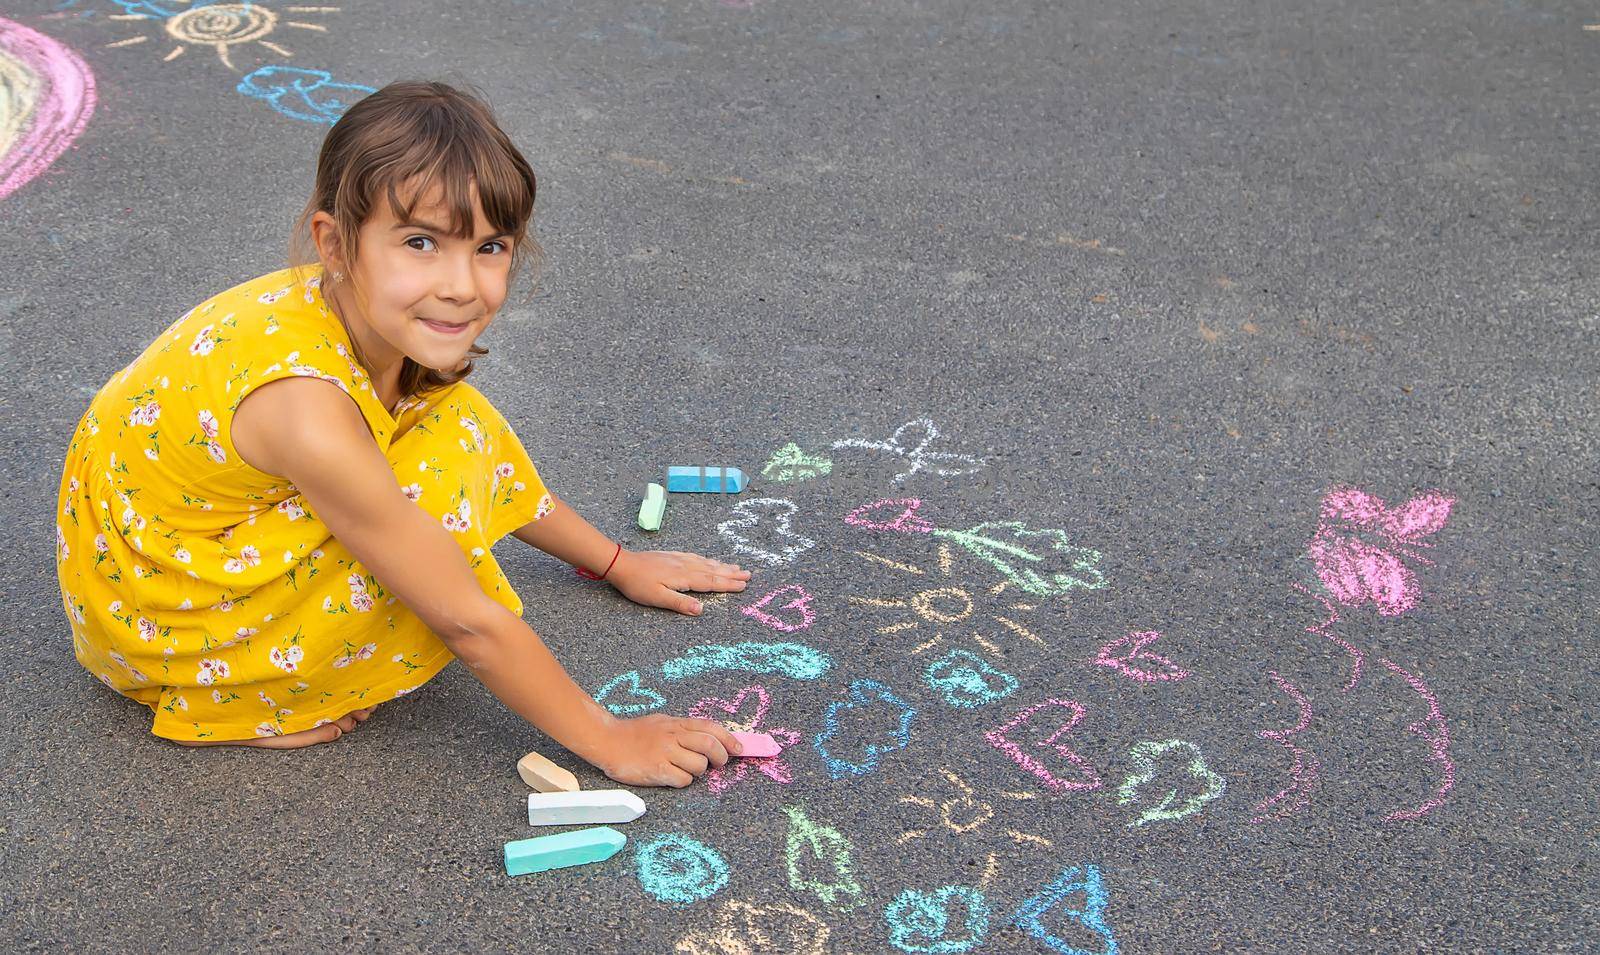 The child draws on the asphalt with chalk. Selective focus. Kid.